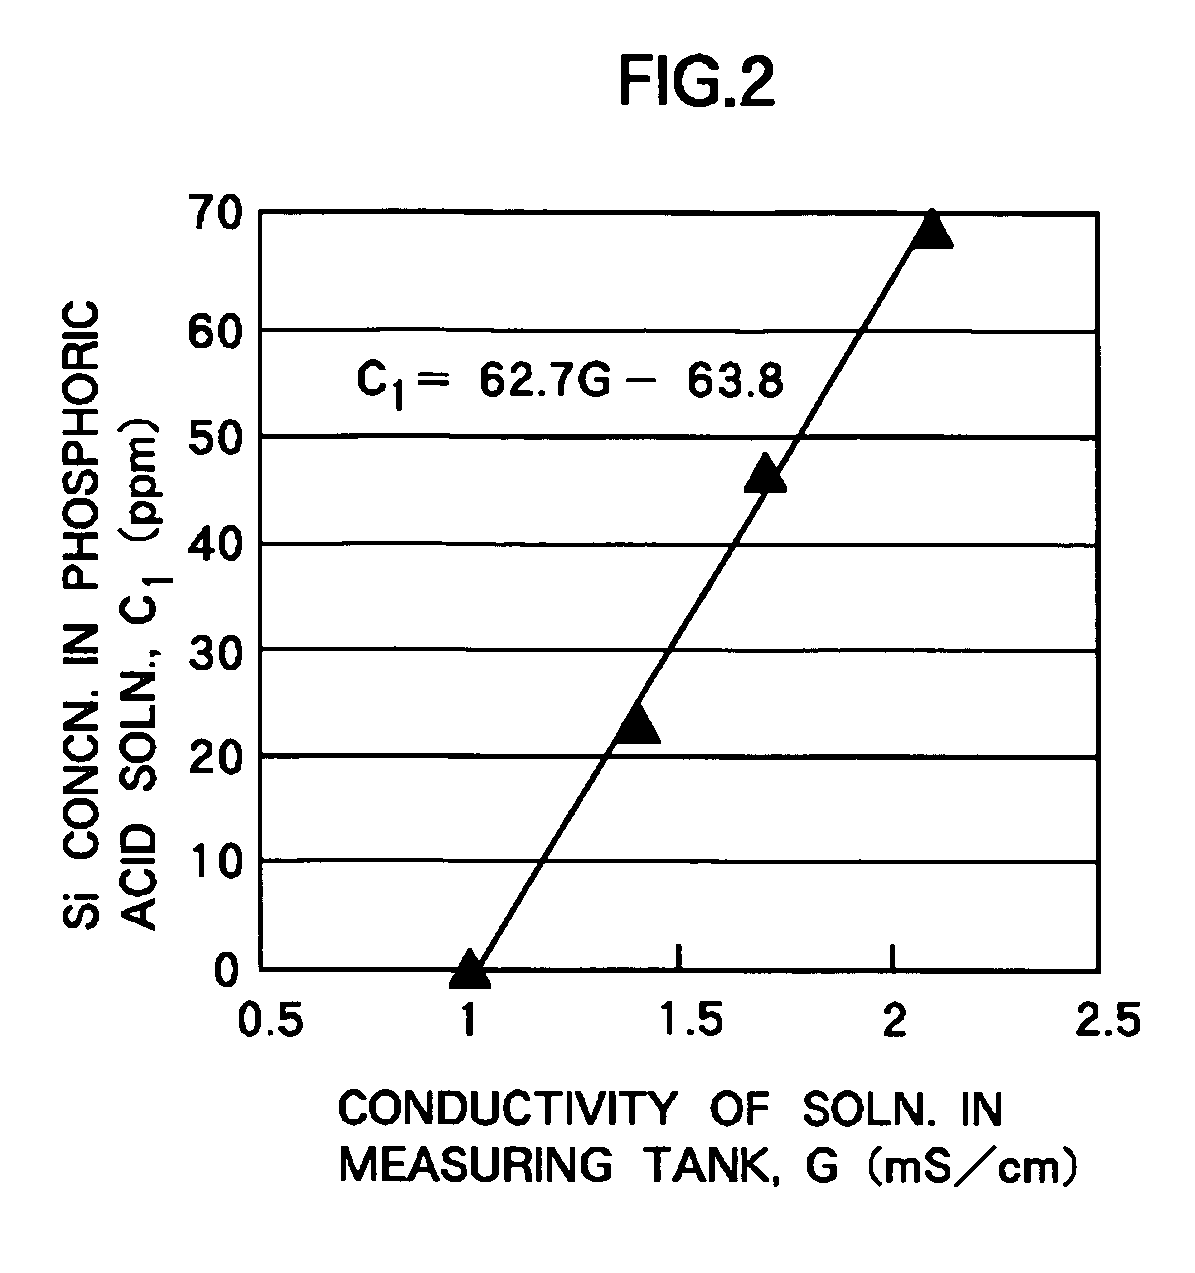 Equipment and method for measuring silicon concentration in phosphoric acid solution